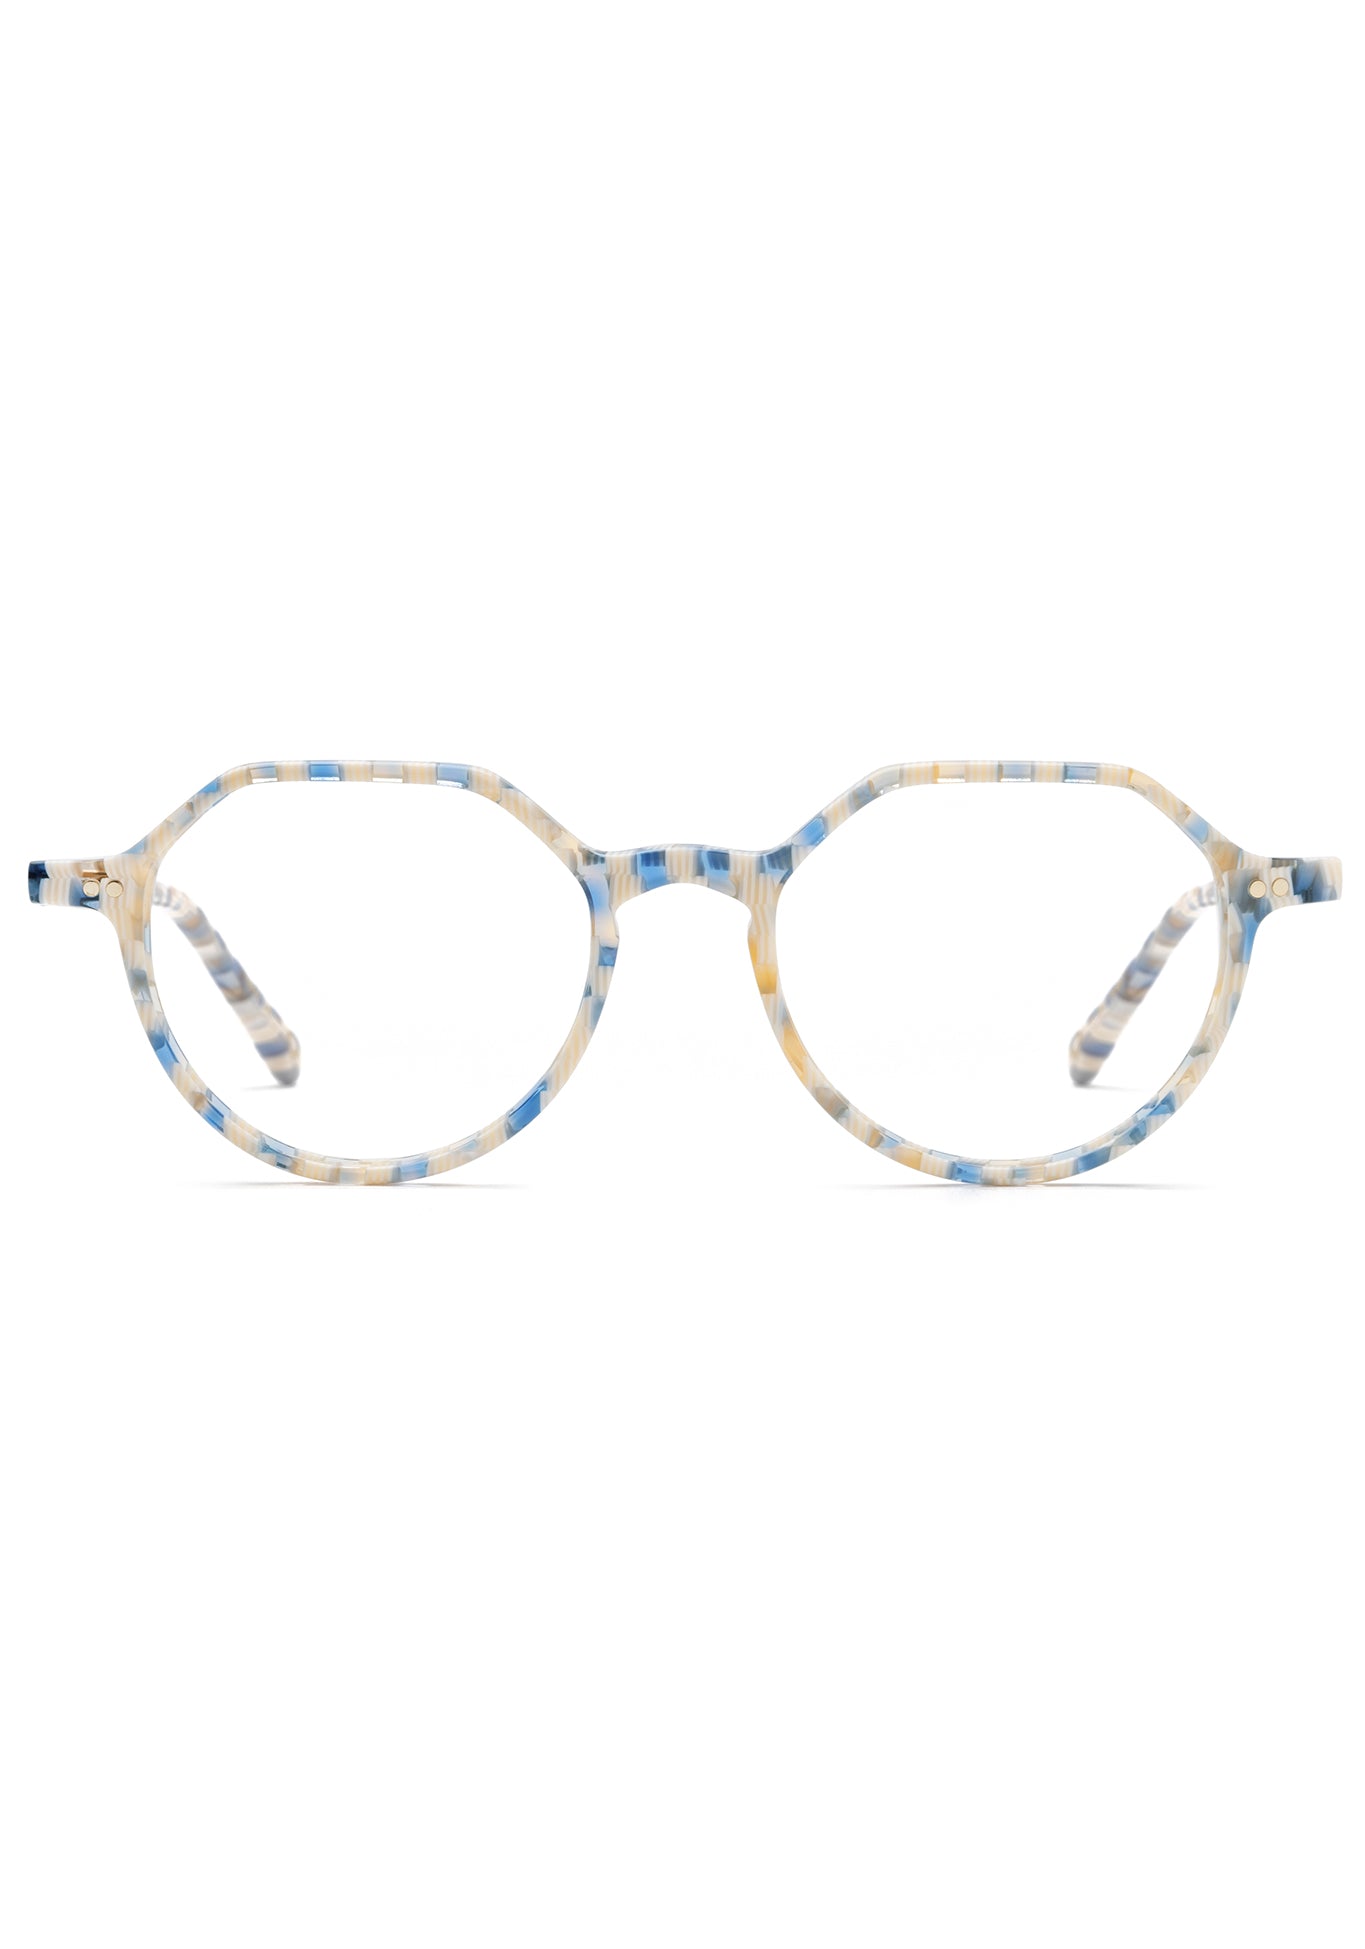 KREWE EYEGLASSES - JOEL | Pincheck handcrafted, luxury blue and white checkered round glasses